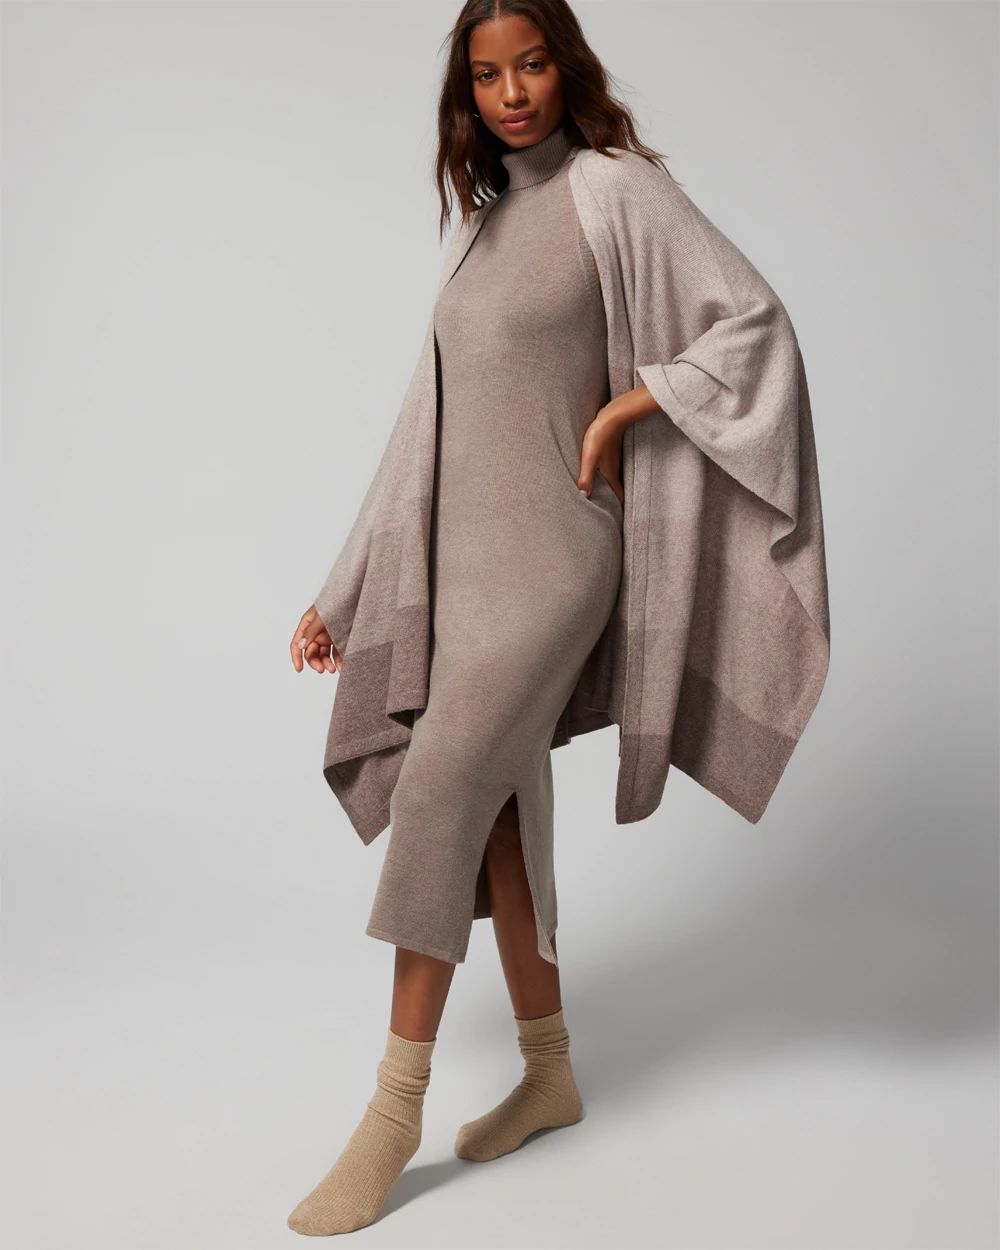 Soma<sup class=st-superscript>®</sup> model wearing taupe sweater dress, ombre wrap sweater, and light brown slouchy socks.